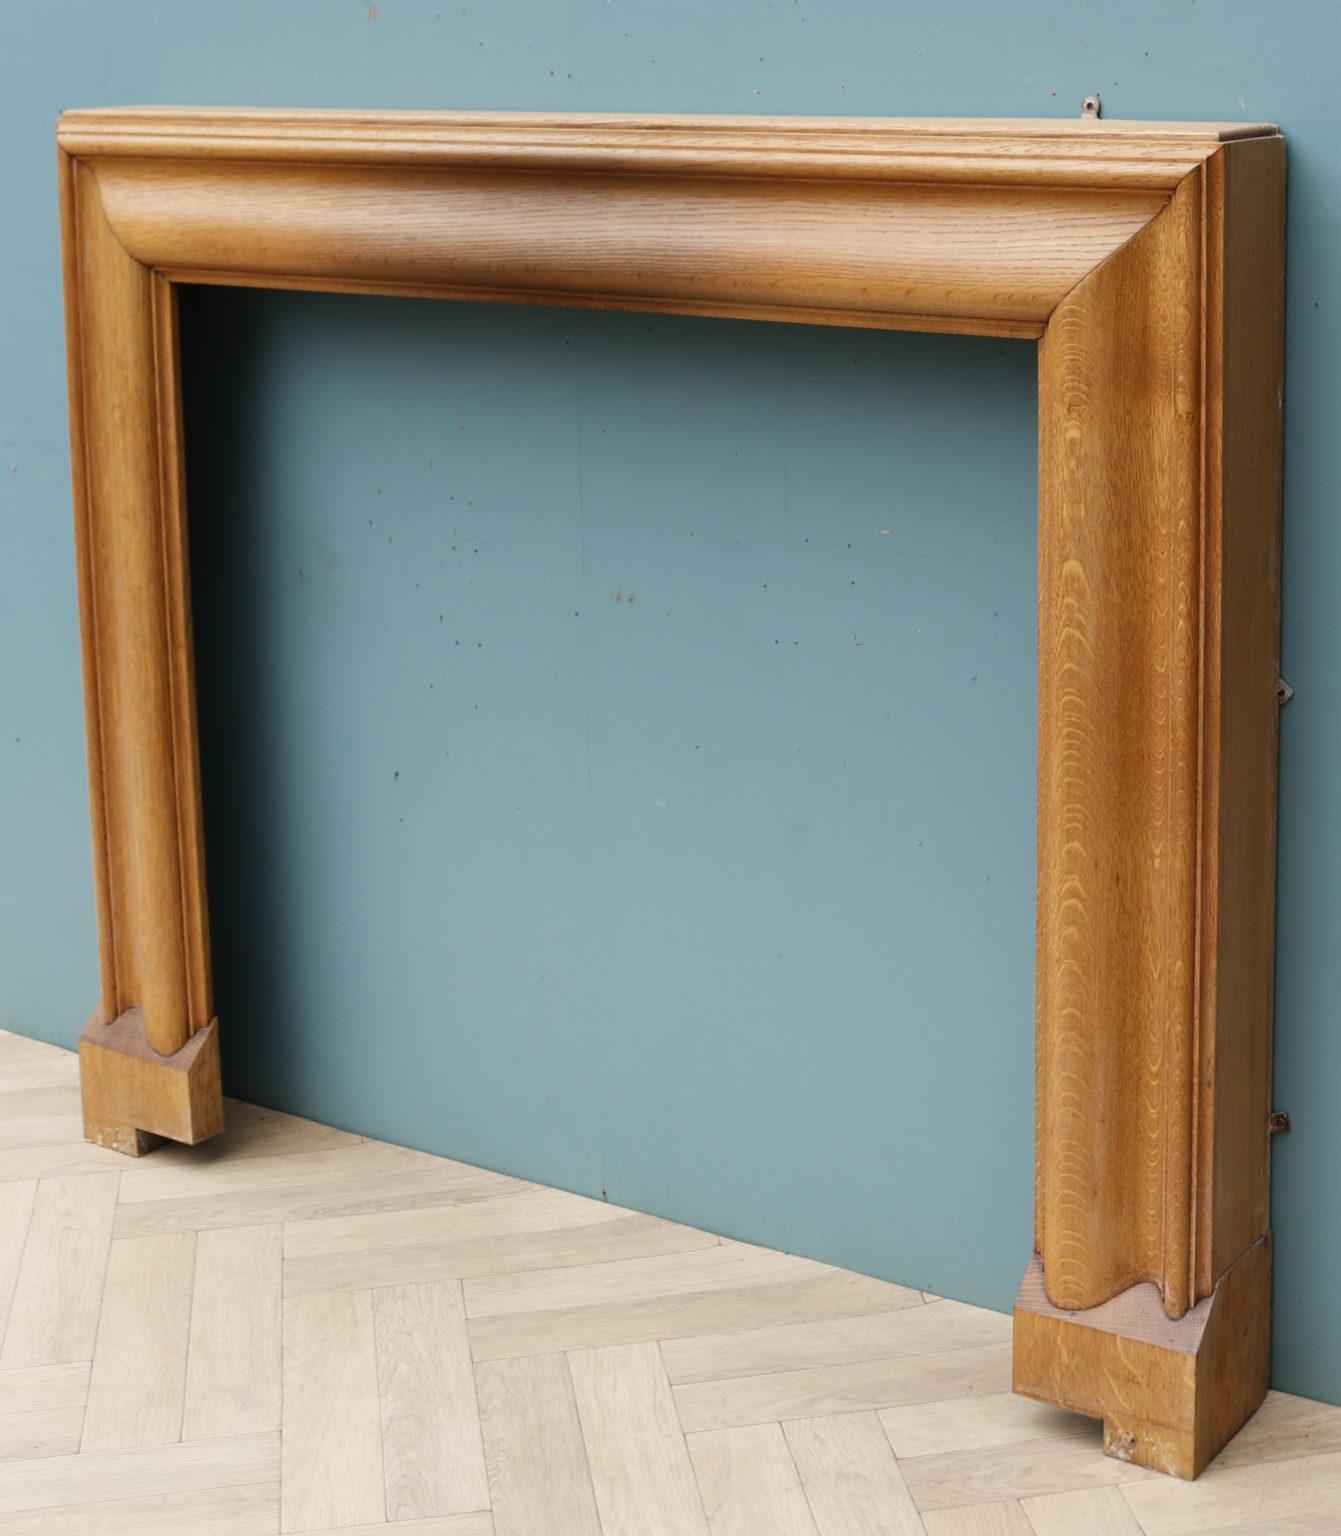 Reclaimed English Oak Bolection Style Mantel In Fair Condition For Sale In Wormelow, Herefordshire